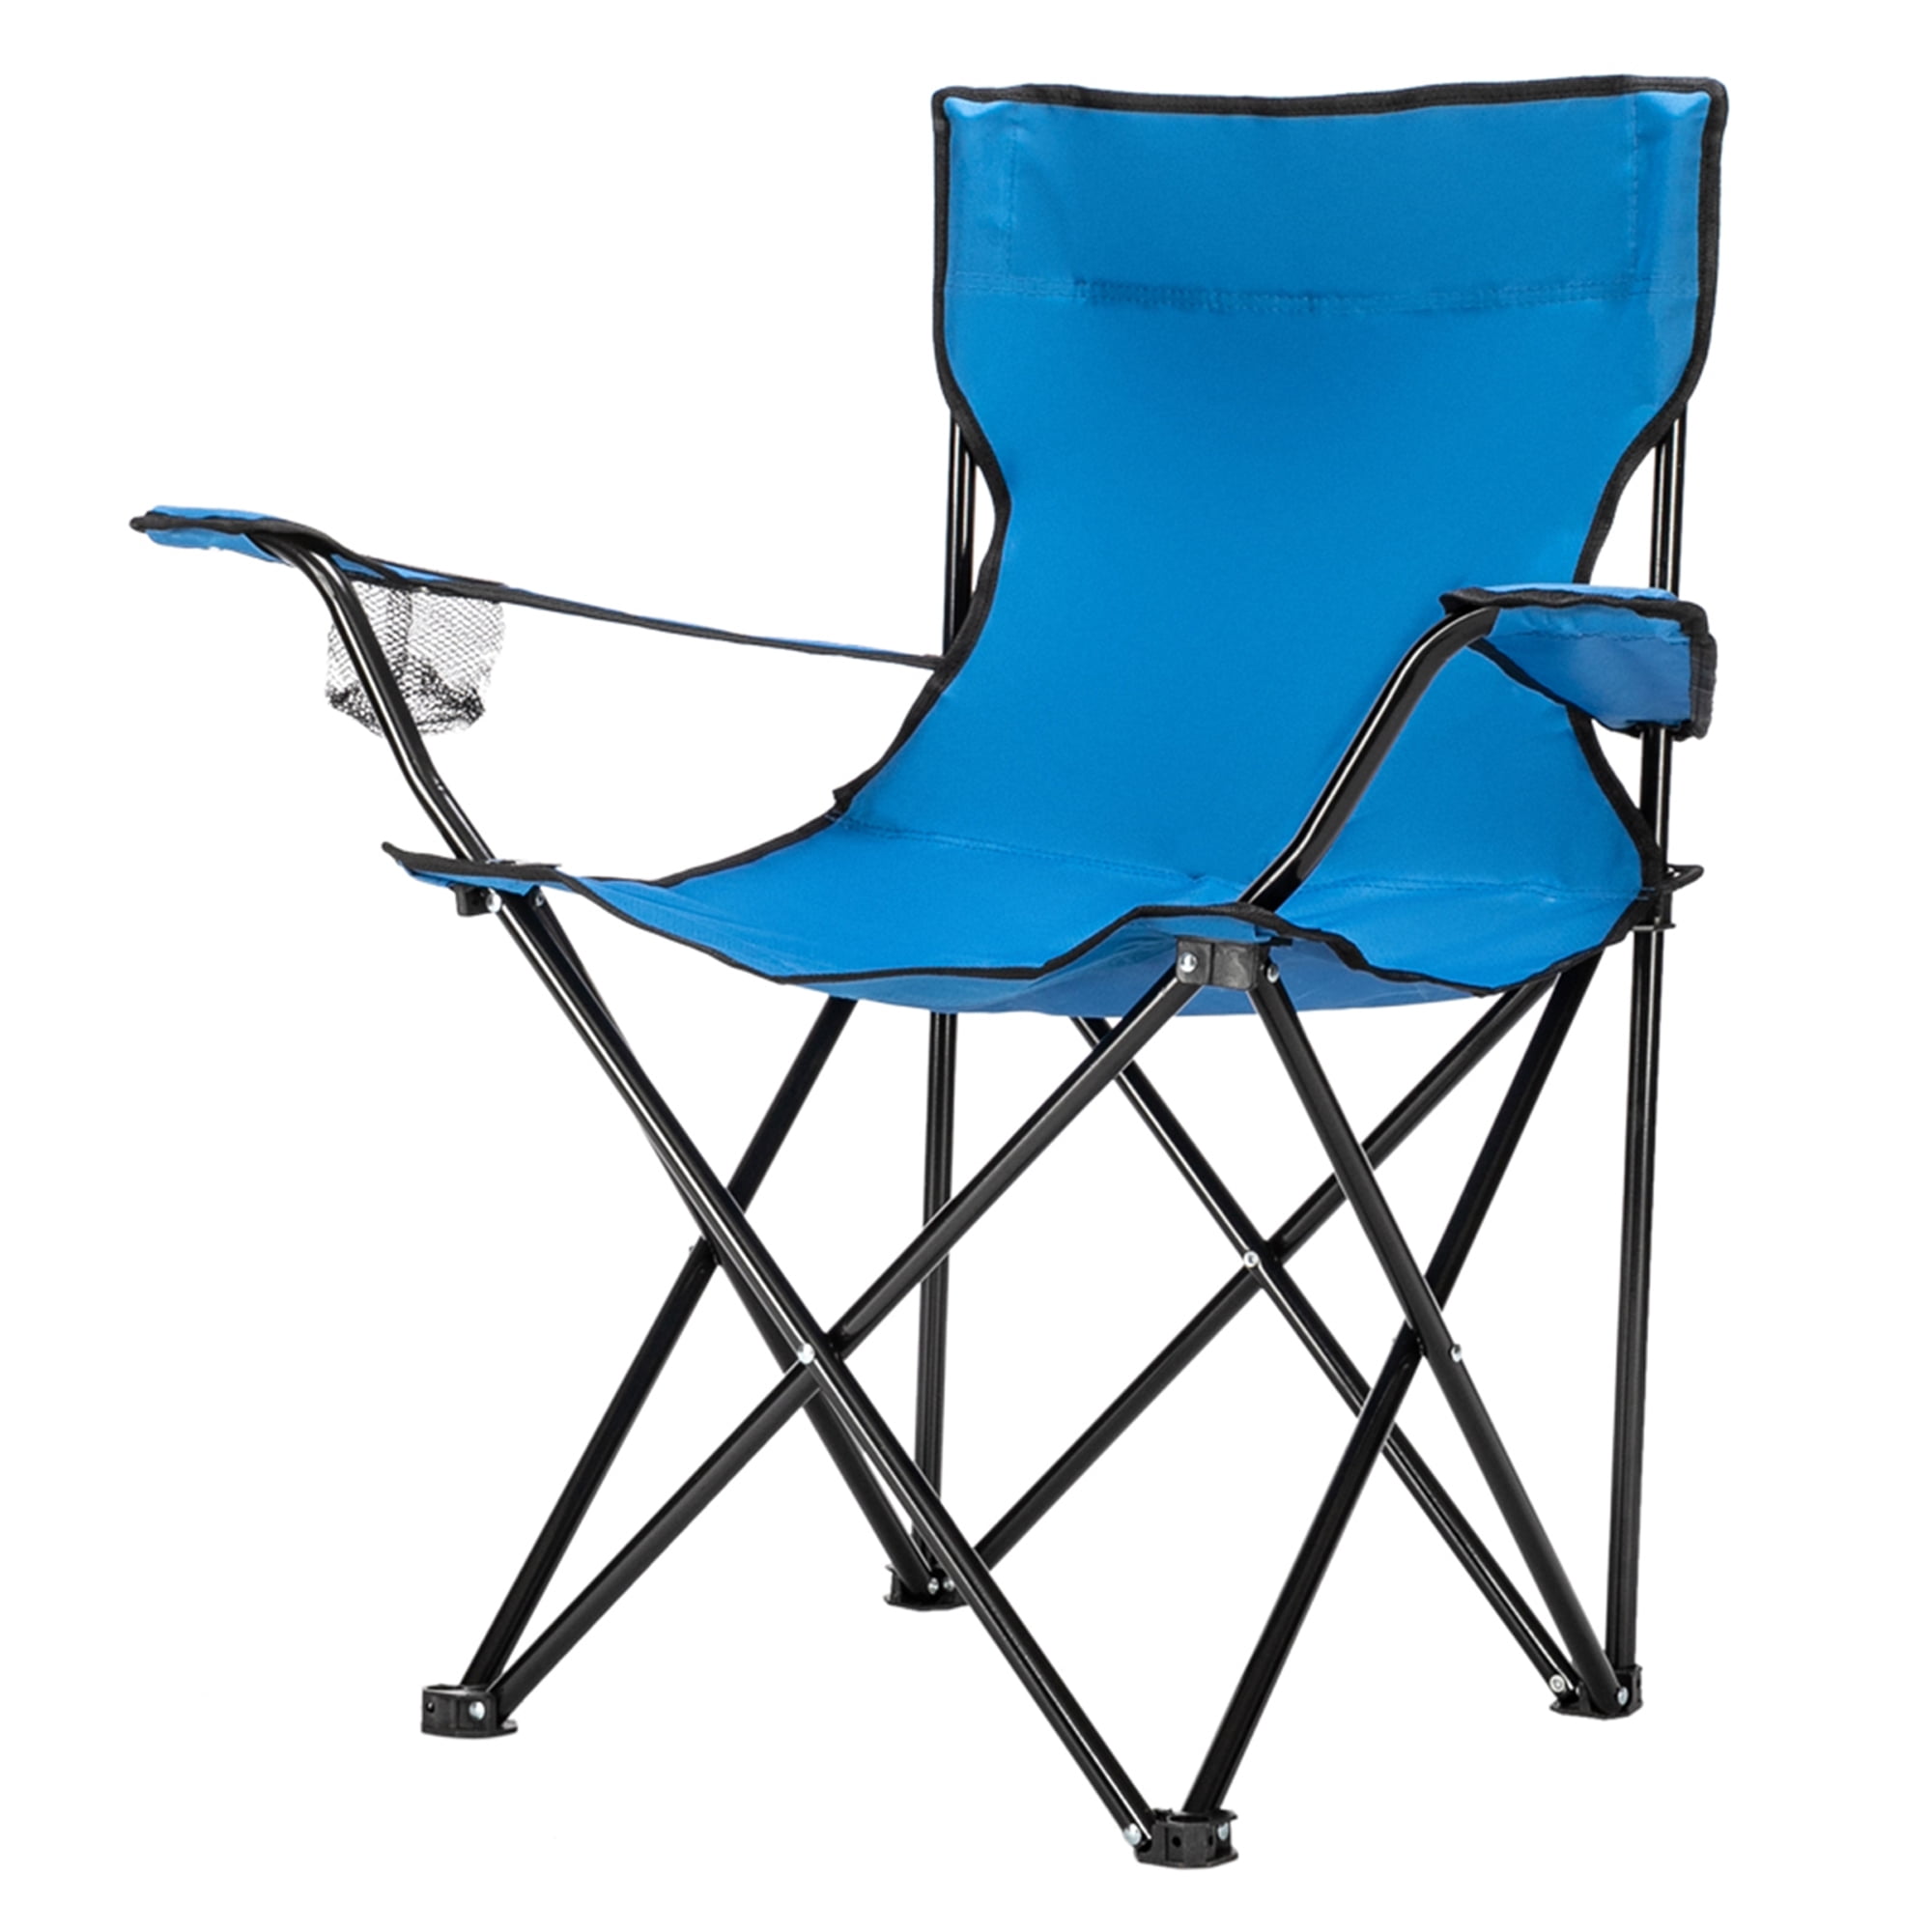 Camping Chair Folding Set Of 4 Arm Regular Portable Picnic Outdoor Hiking New